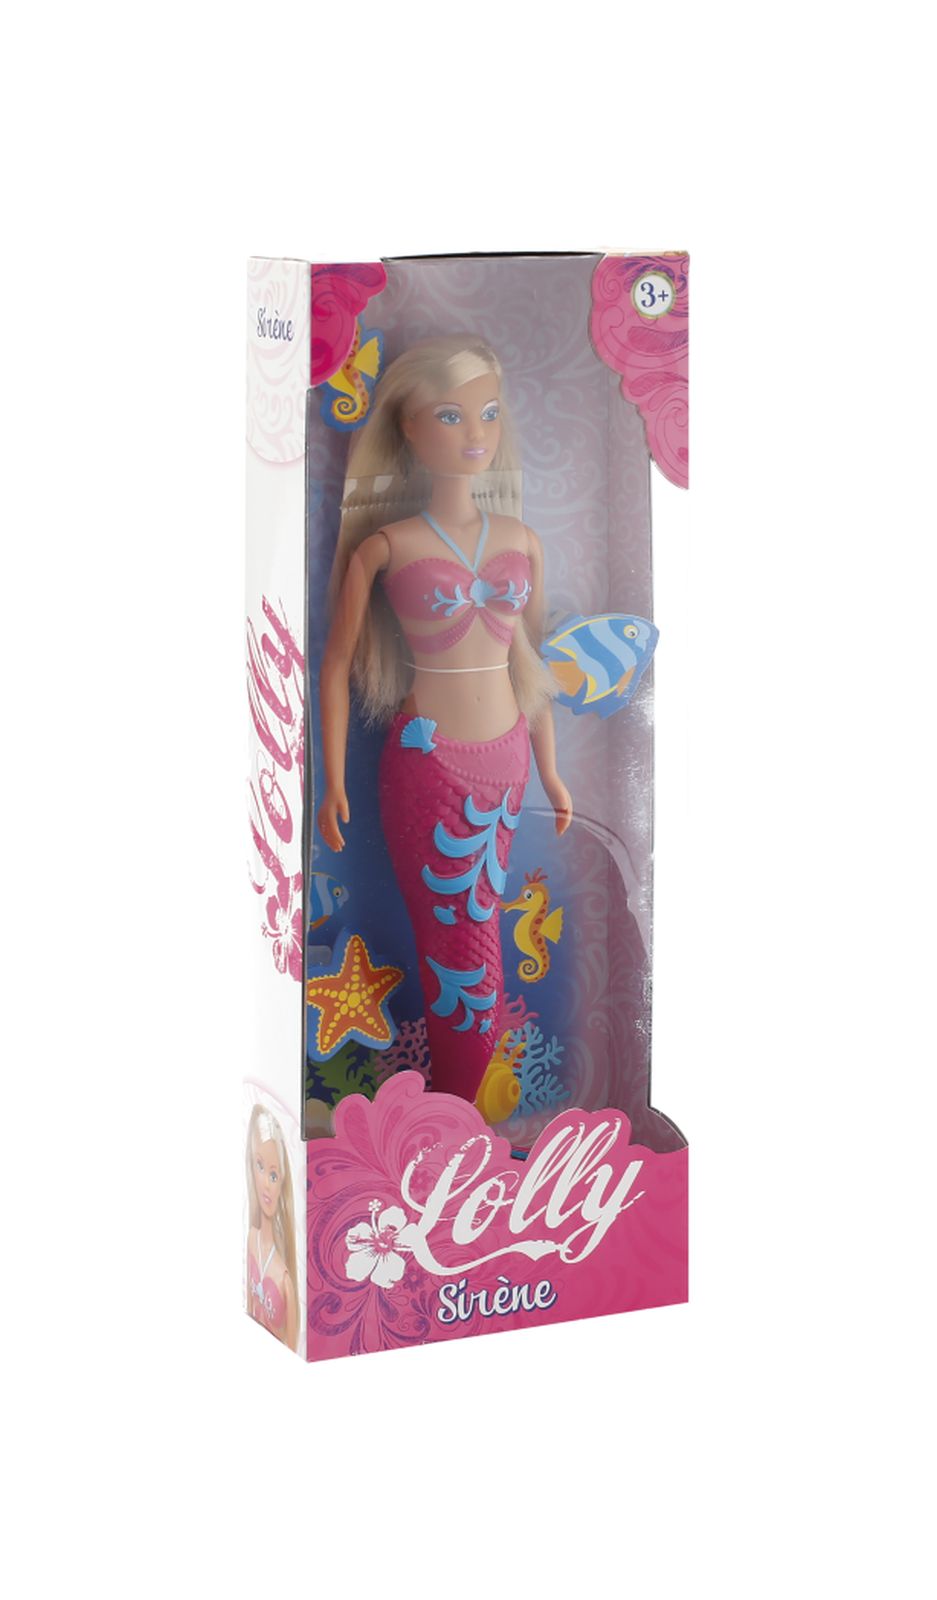 Lolly sirena - LOLLY